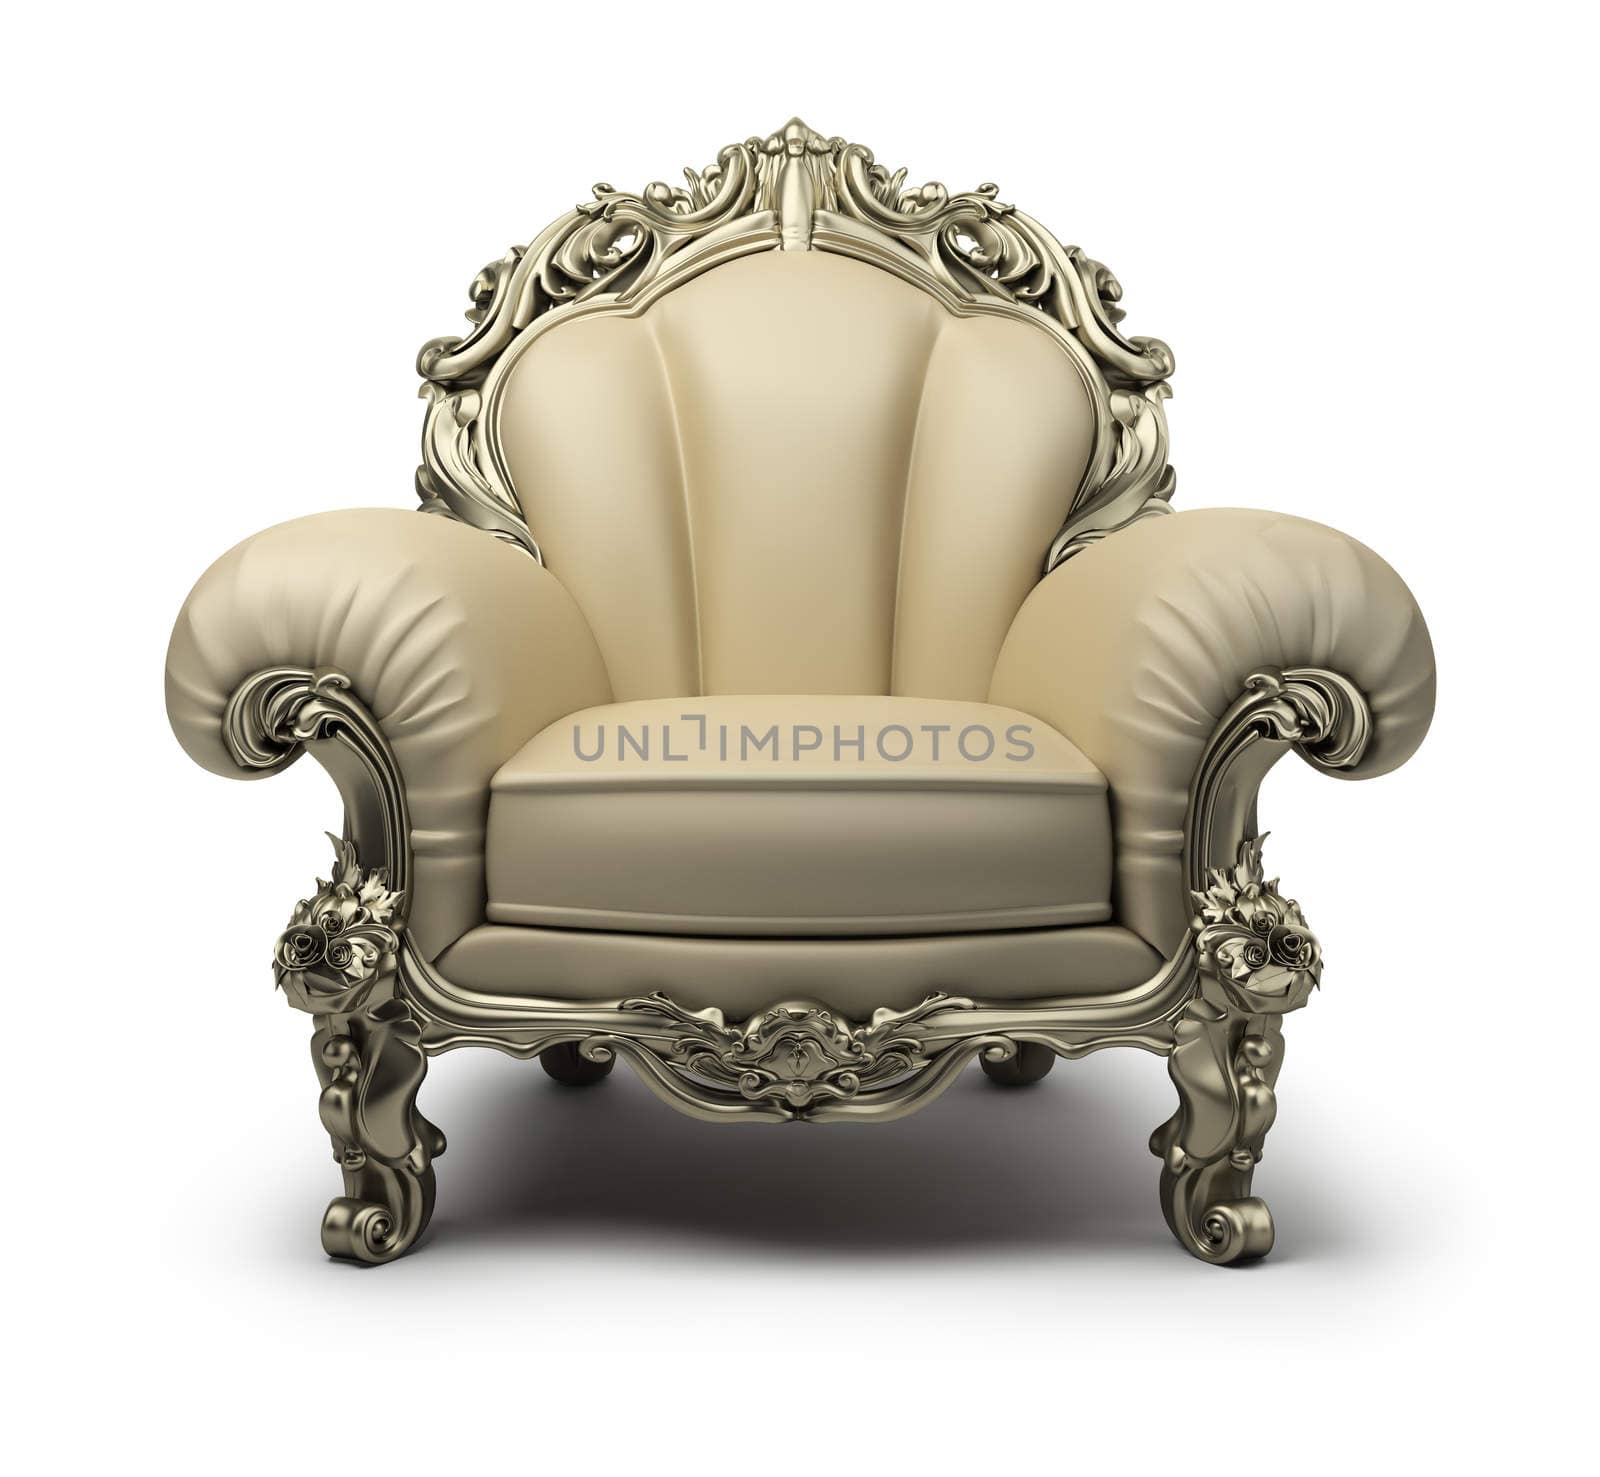 Luxury armchair of beige colour, with a silver decor. 3d image. Isolated white background.